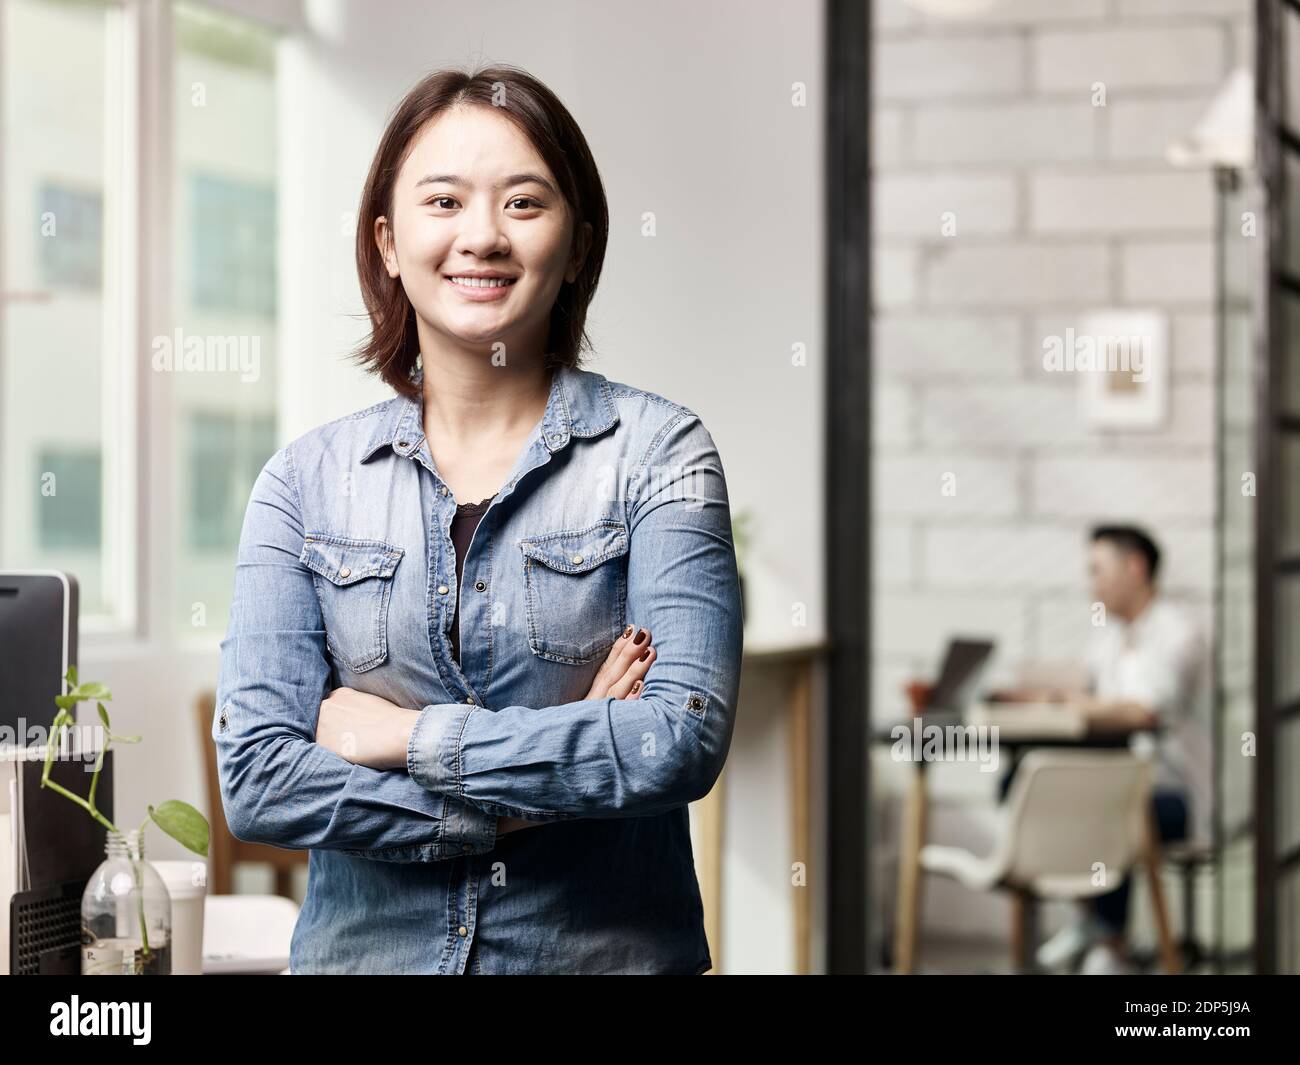 portrait of a young asian business woman looking at camera smiling arms crossed Stock Photo